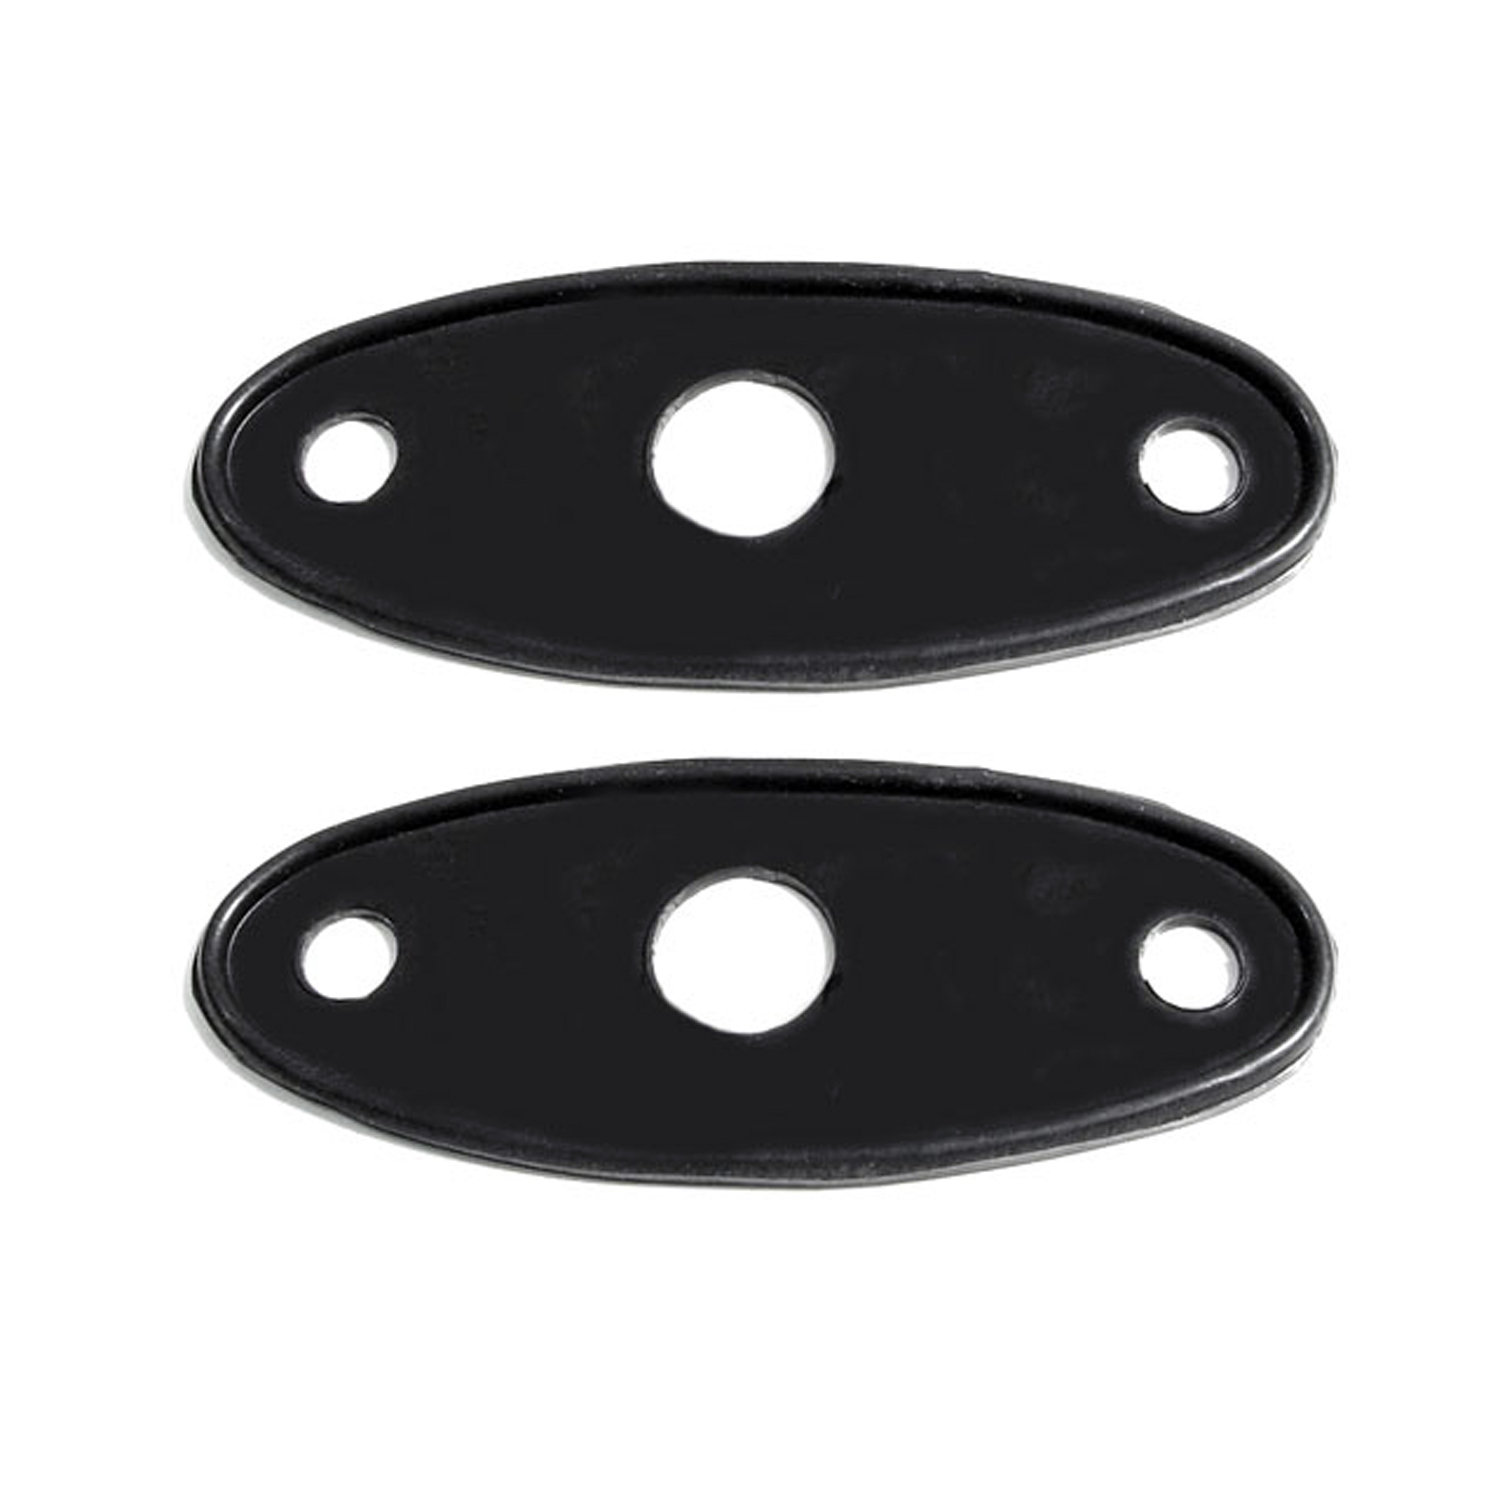 1930 Reo Flying Cloud Side Tire Bracket Mounting Pads.  1-1/2 wide X 3-4/8 long-MP 993-C